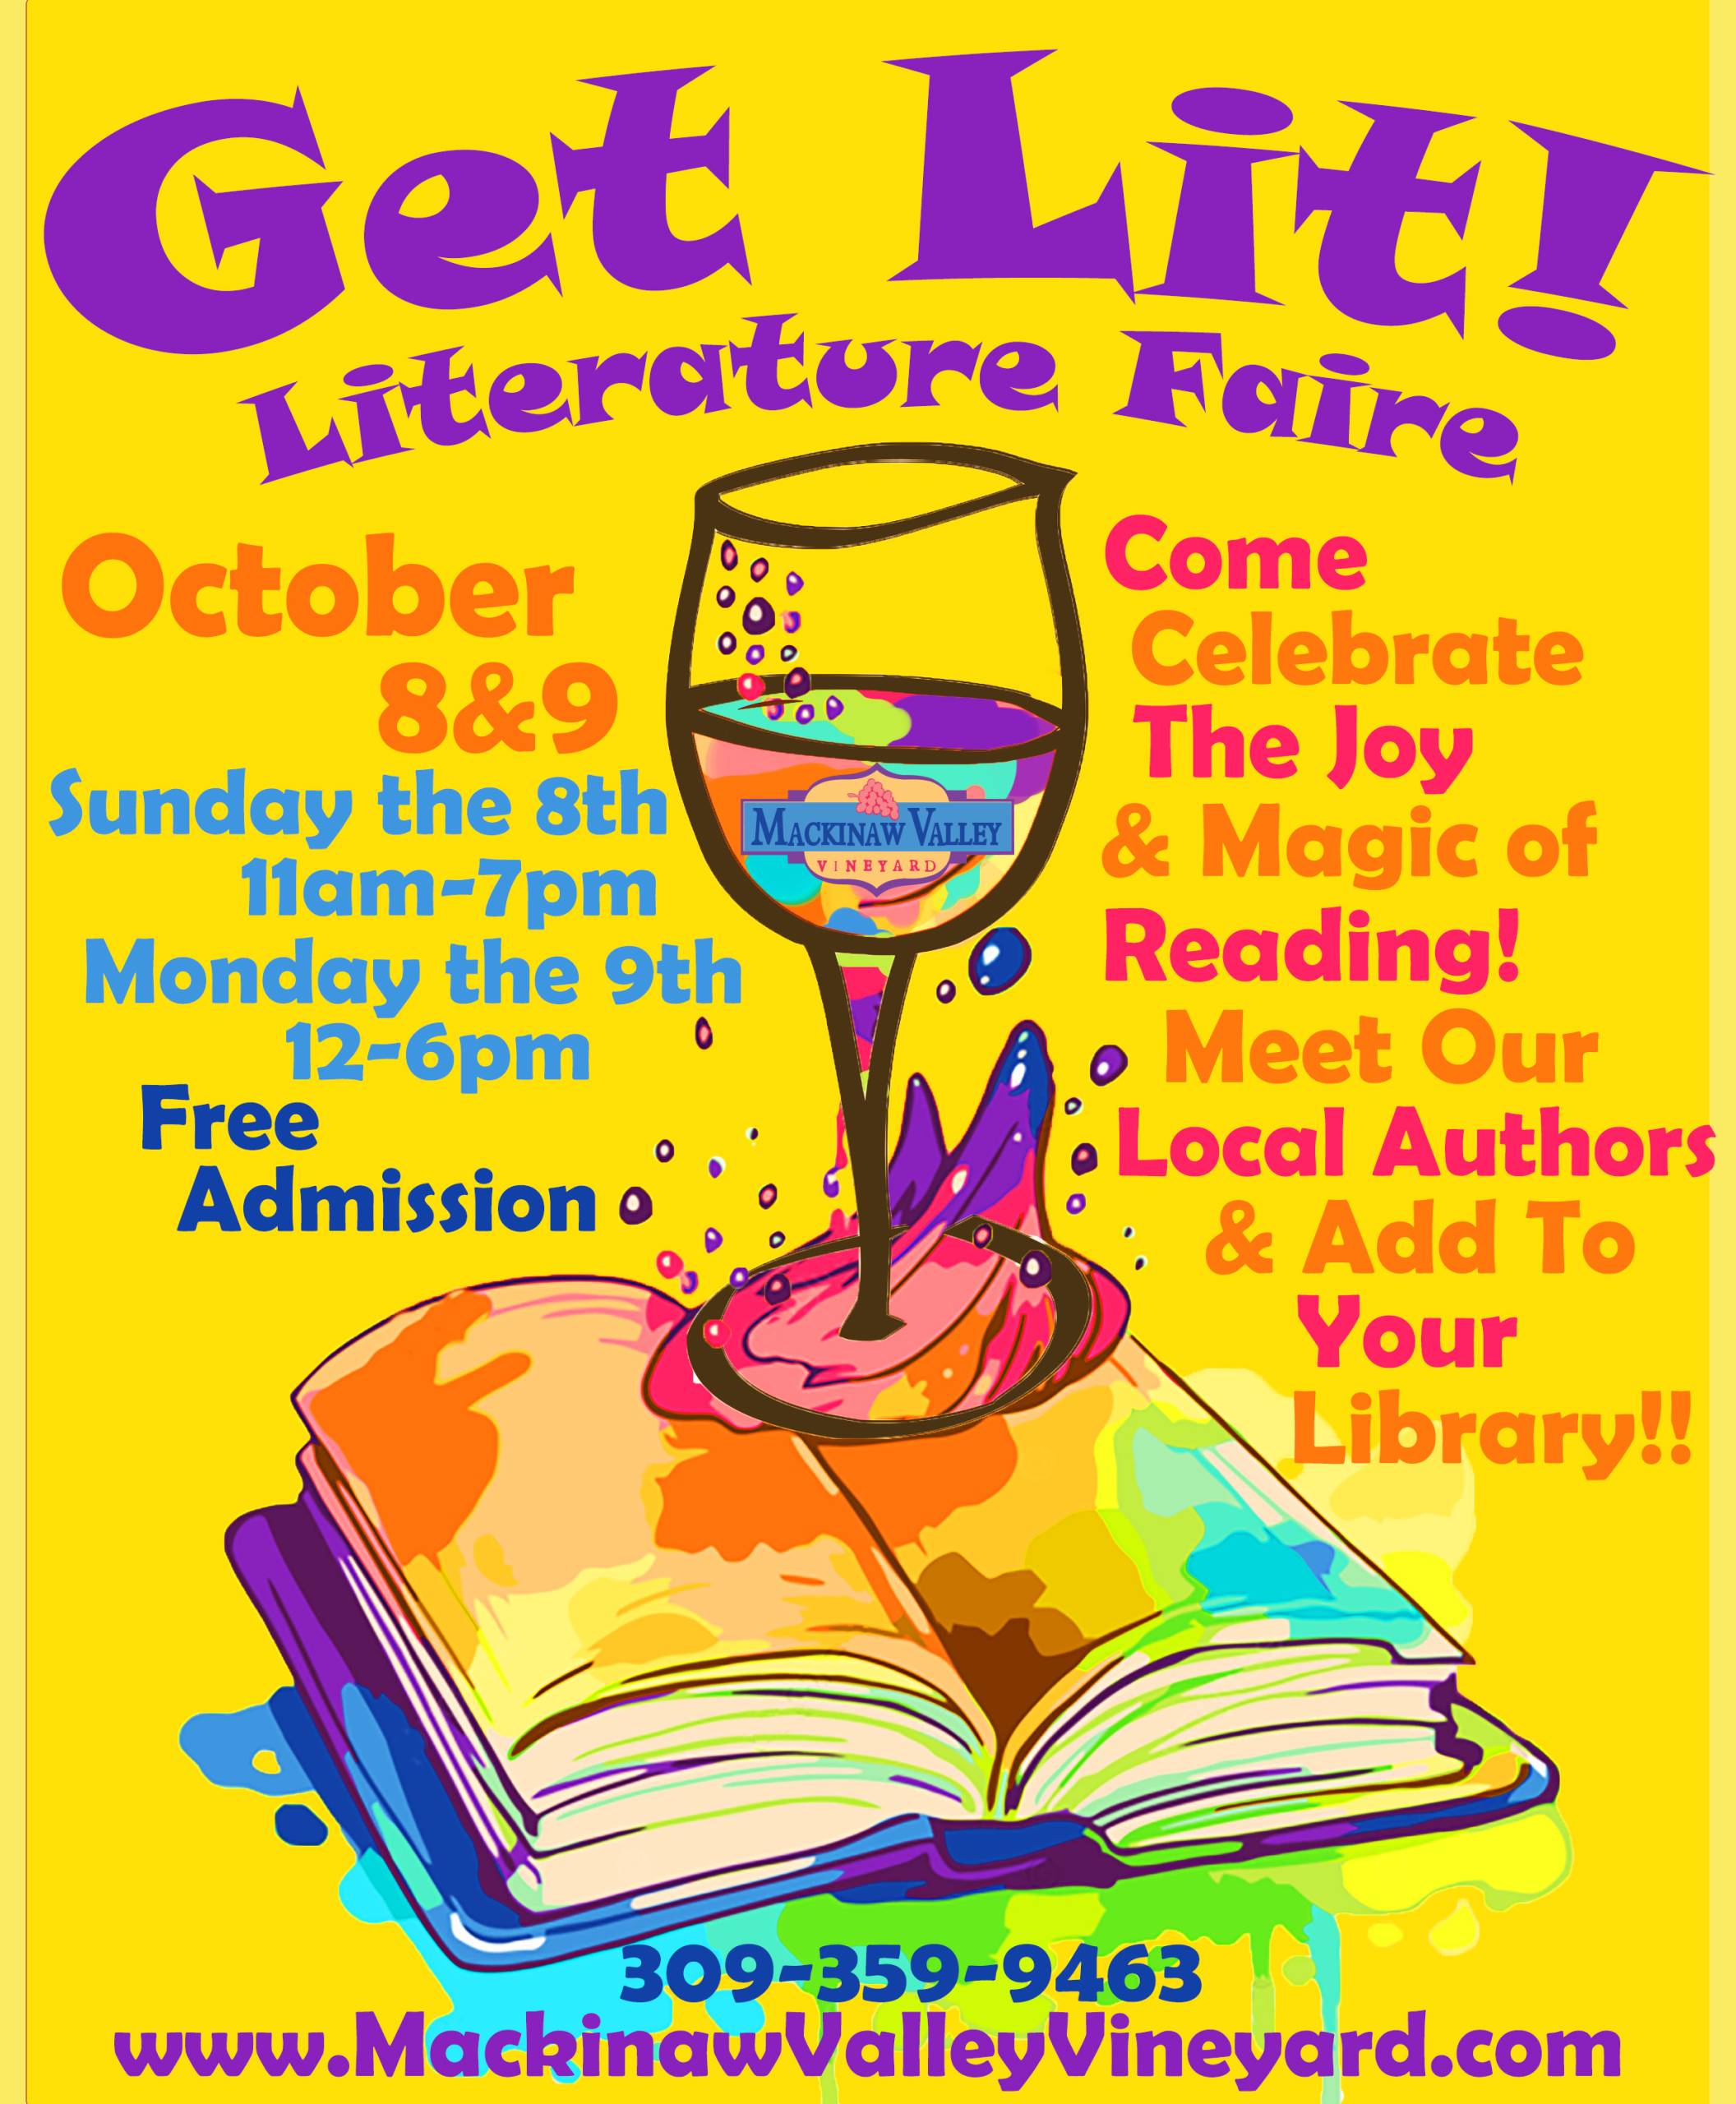 "GET LIT" Two Day Literature Faire at the vineyard